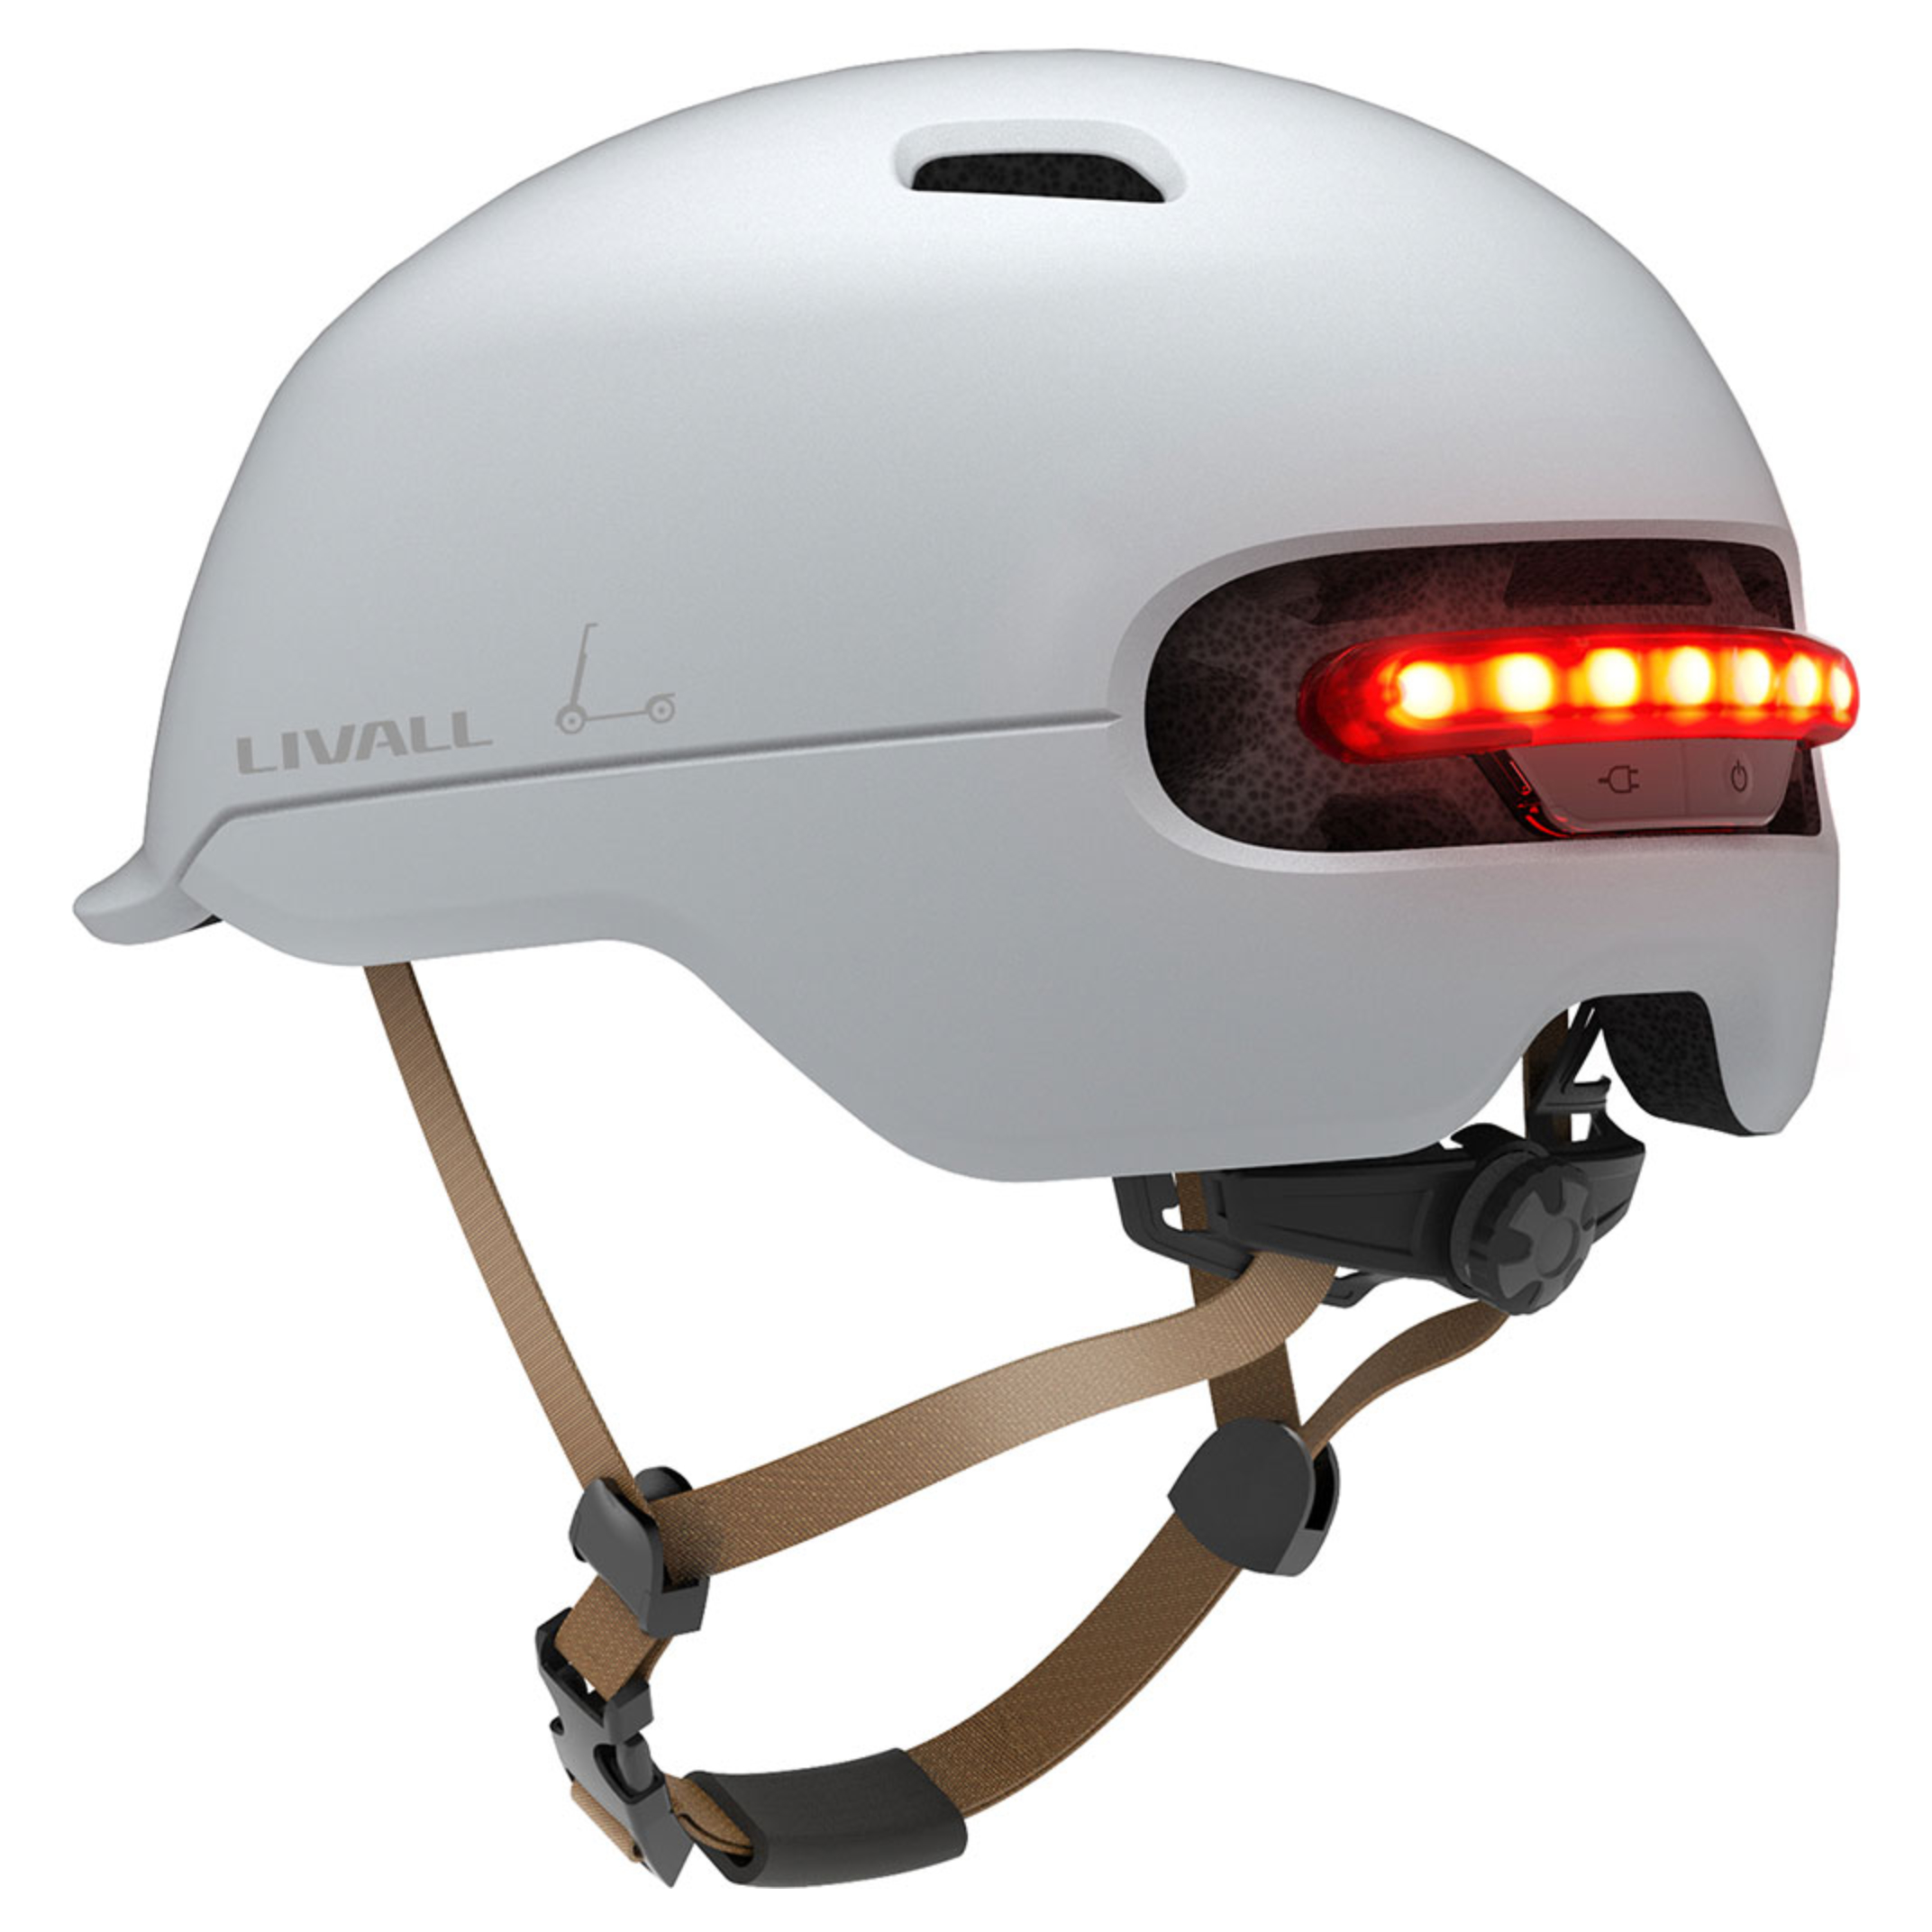 CYCLING HELMET LIVALL C20 SMART SAFETY SCOOTER 